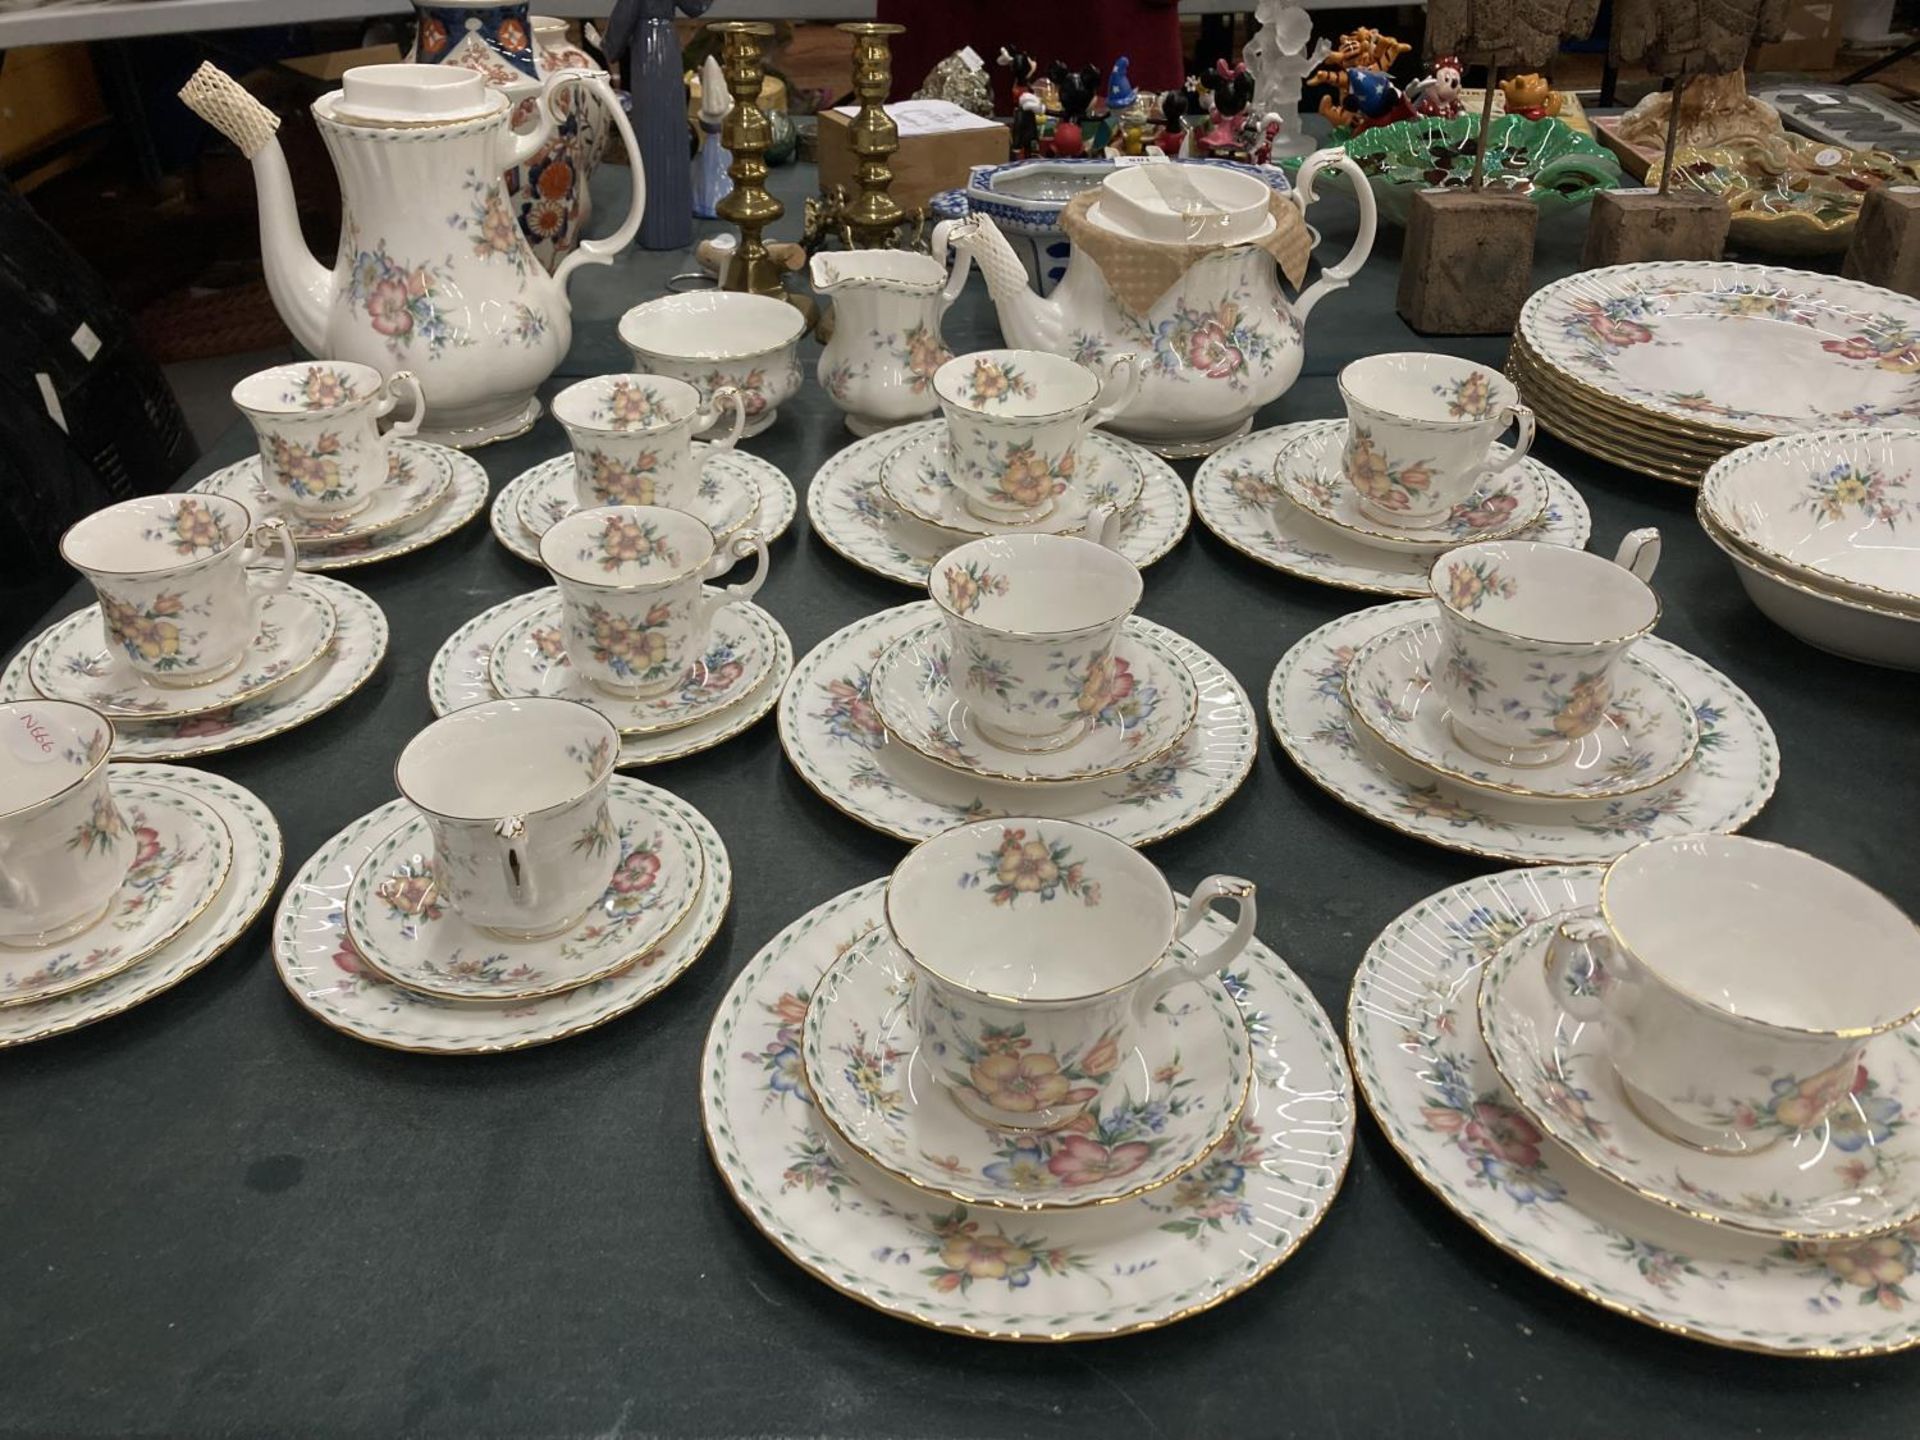 A LARGE QUANTITY OF ROYAL ALBERT 'CONSTANCE' TO INCLUDE A TEAPOT AND COFFEE POT, SIX COFFEE CUPS AND - Image 6 of 7